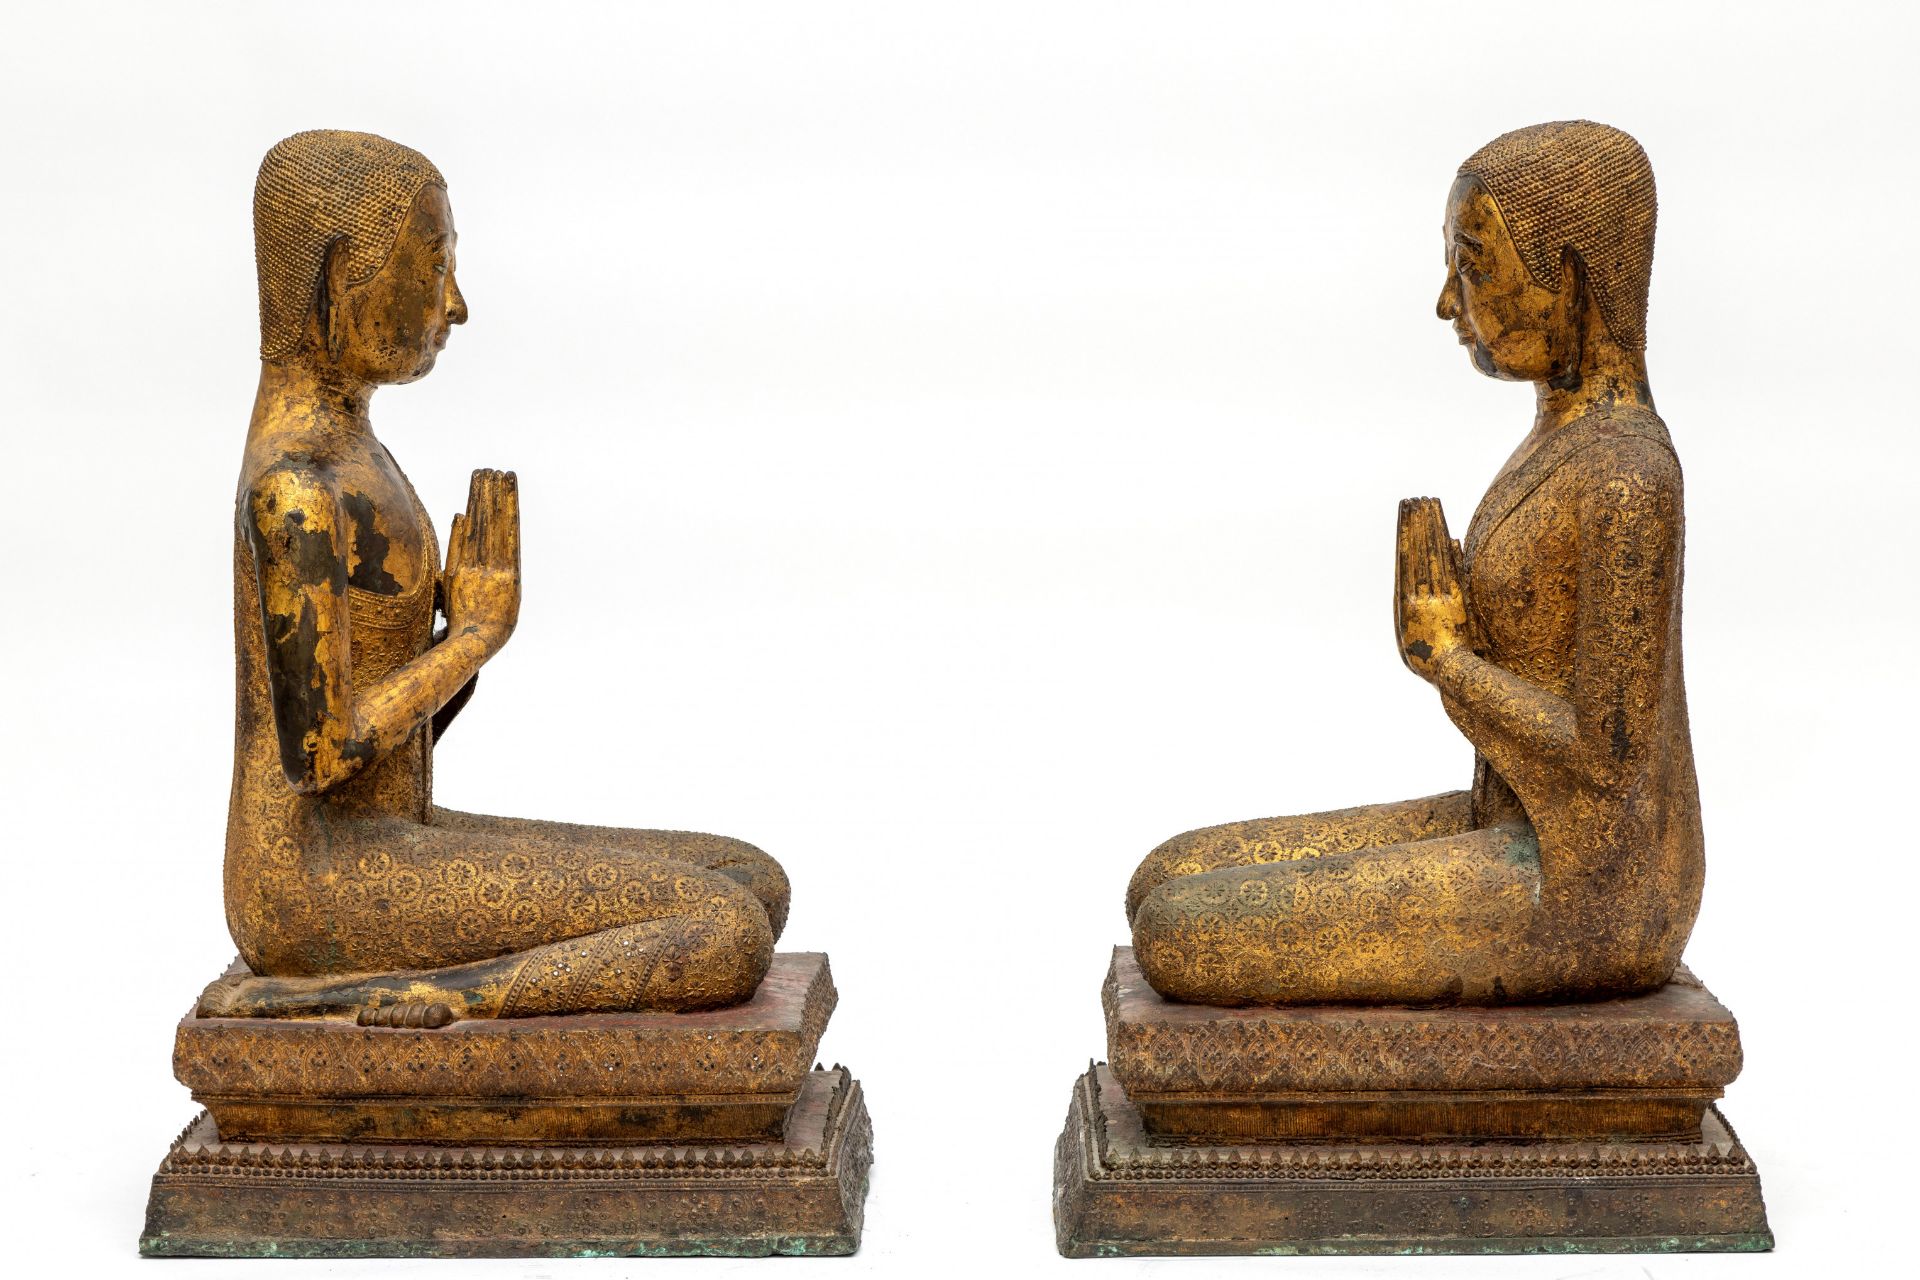 Thailand, Ratnakosin, a pair of guilded bronze temple adorants, 18th-19th century - Image 2 of 5